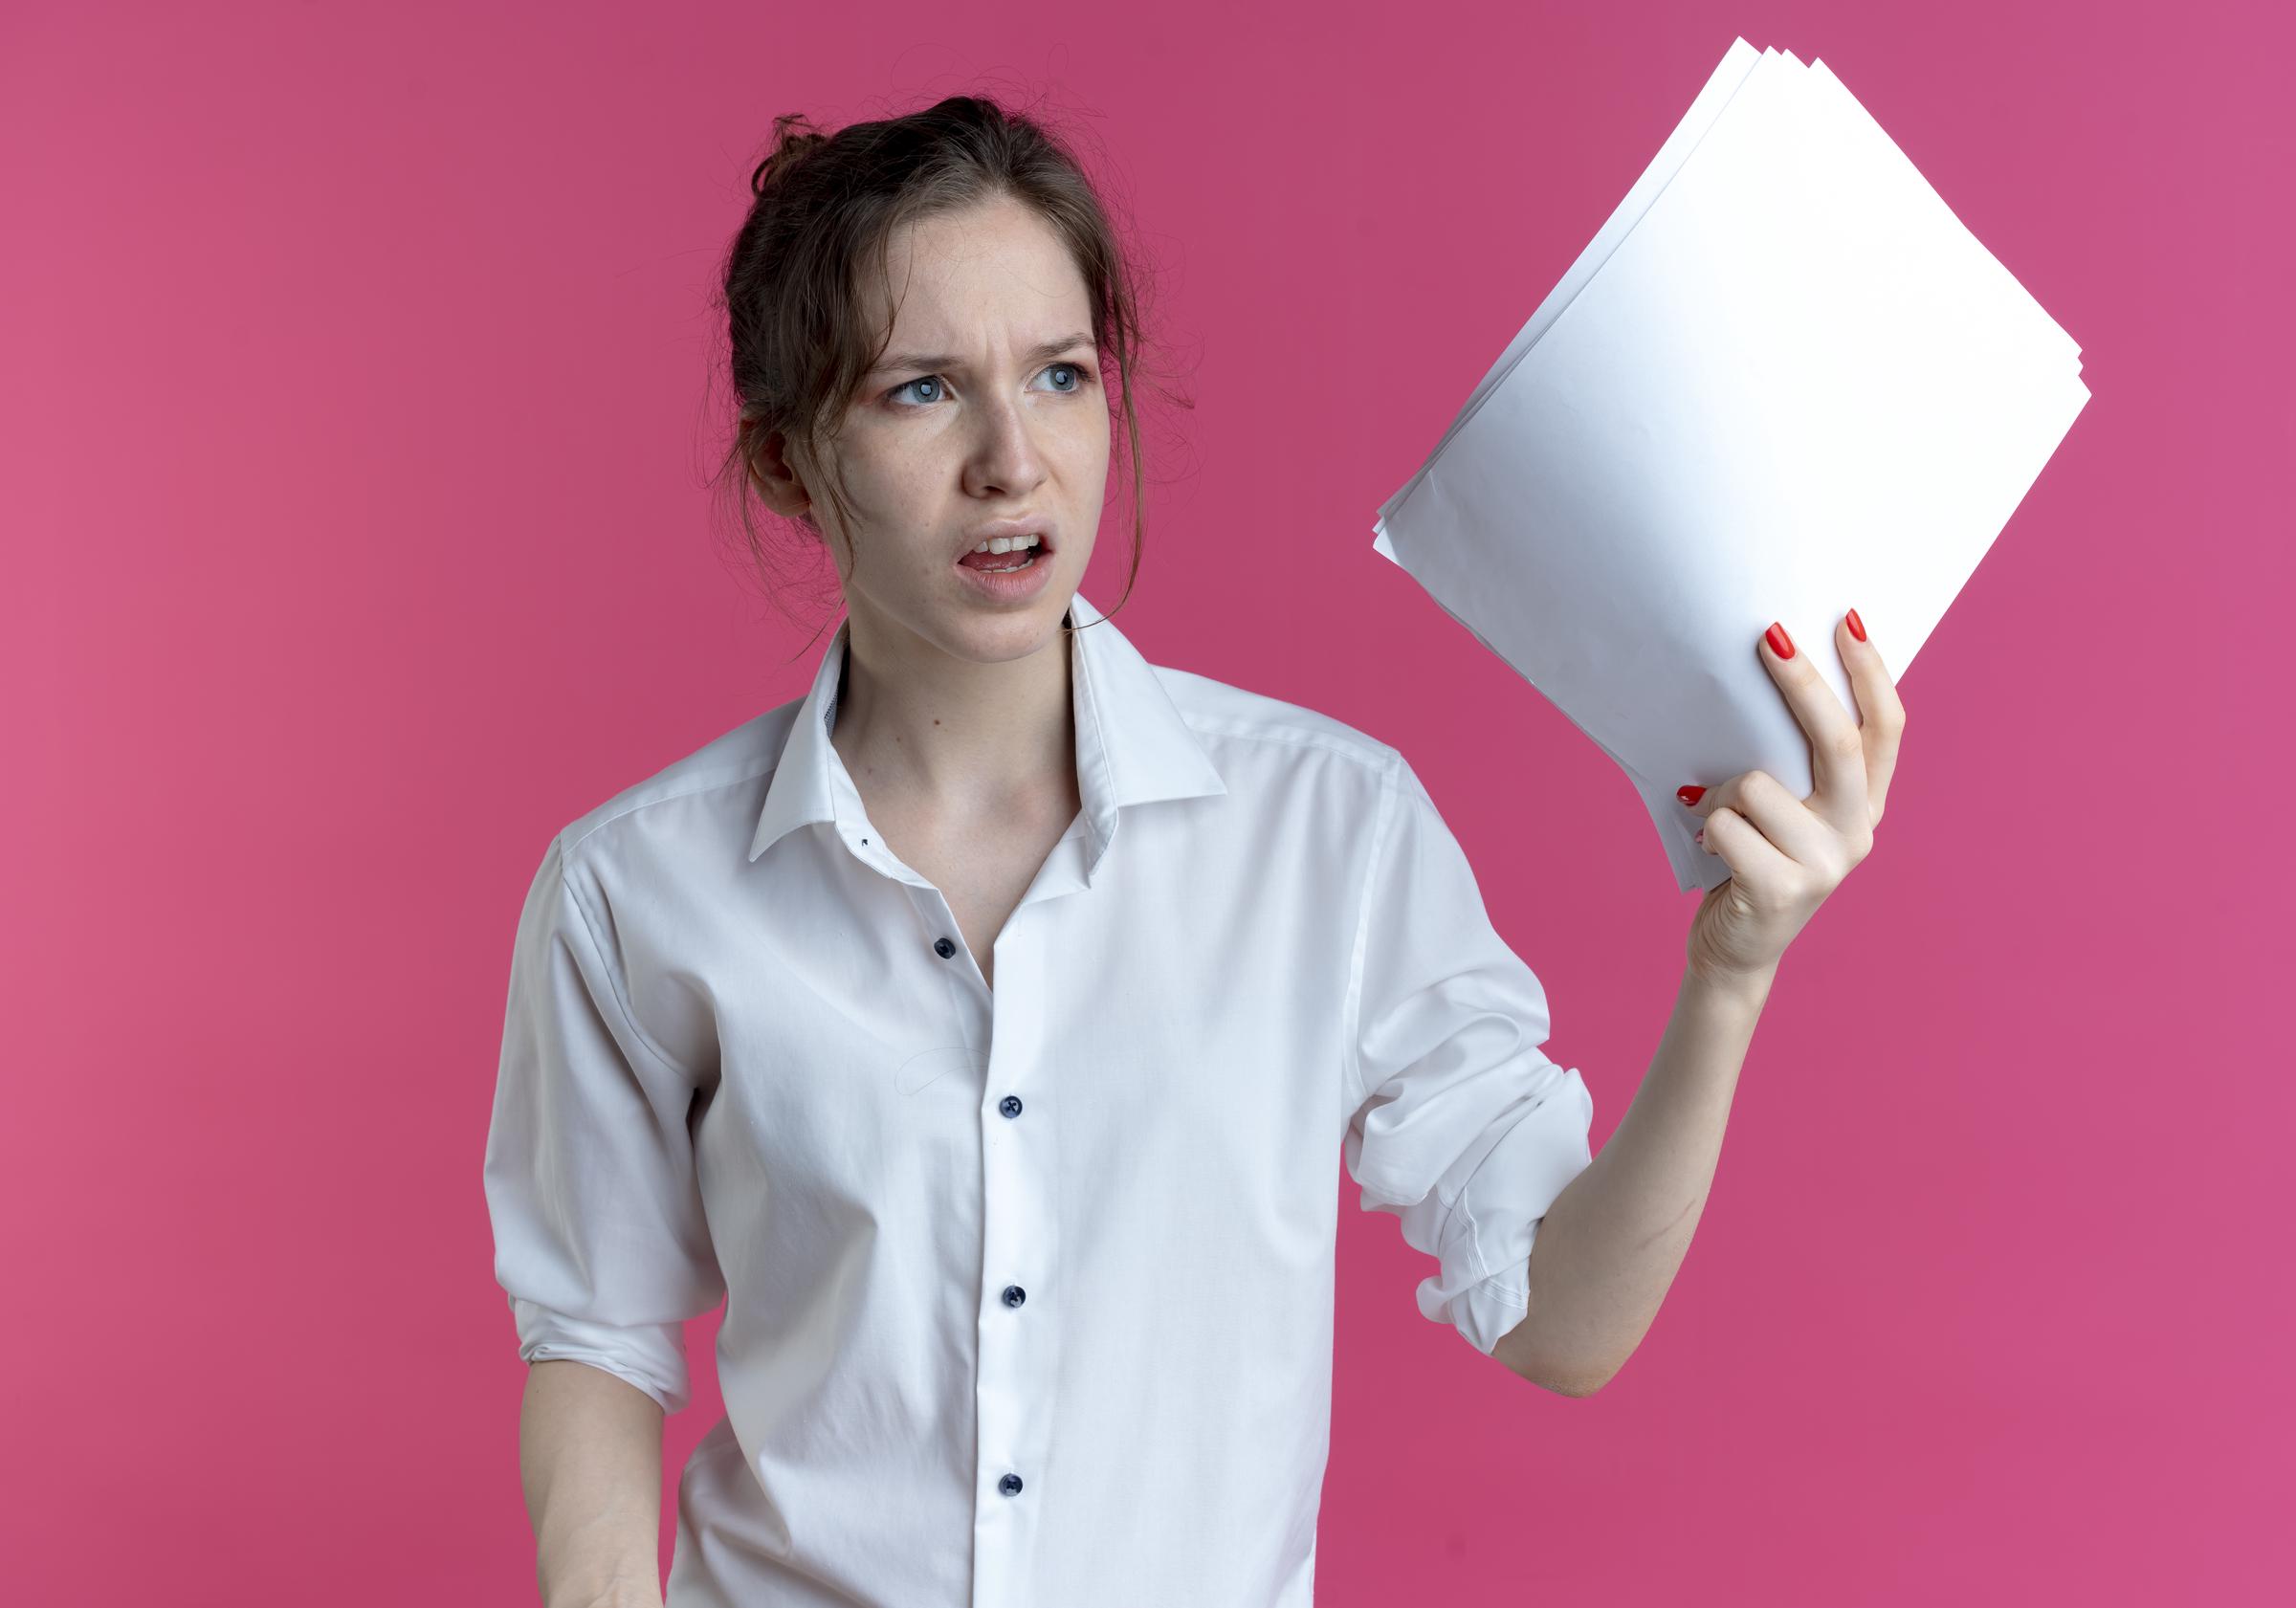 An angry woman holding up documents | Source: Freepik